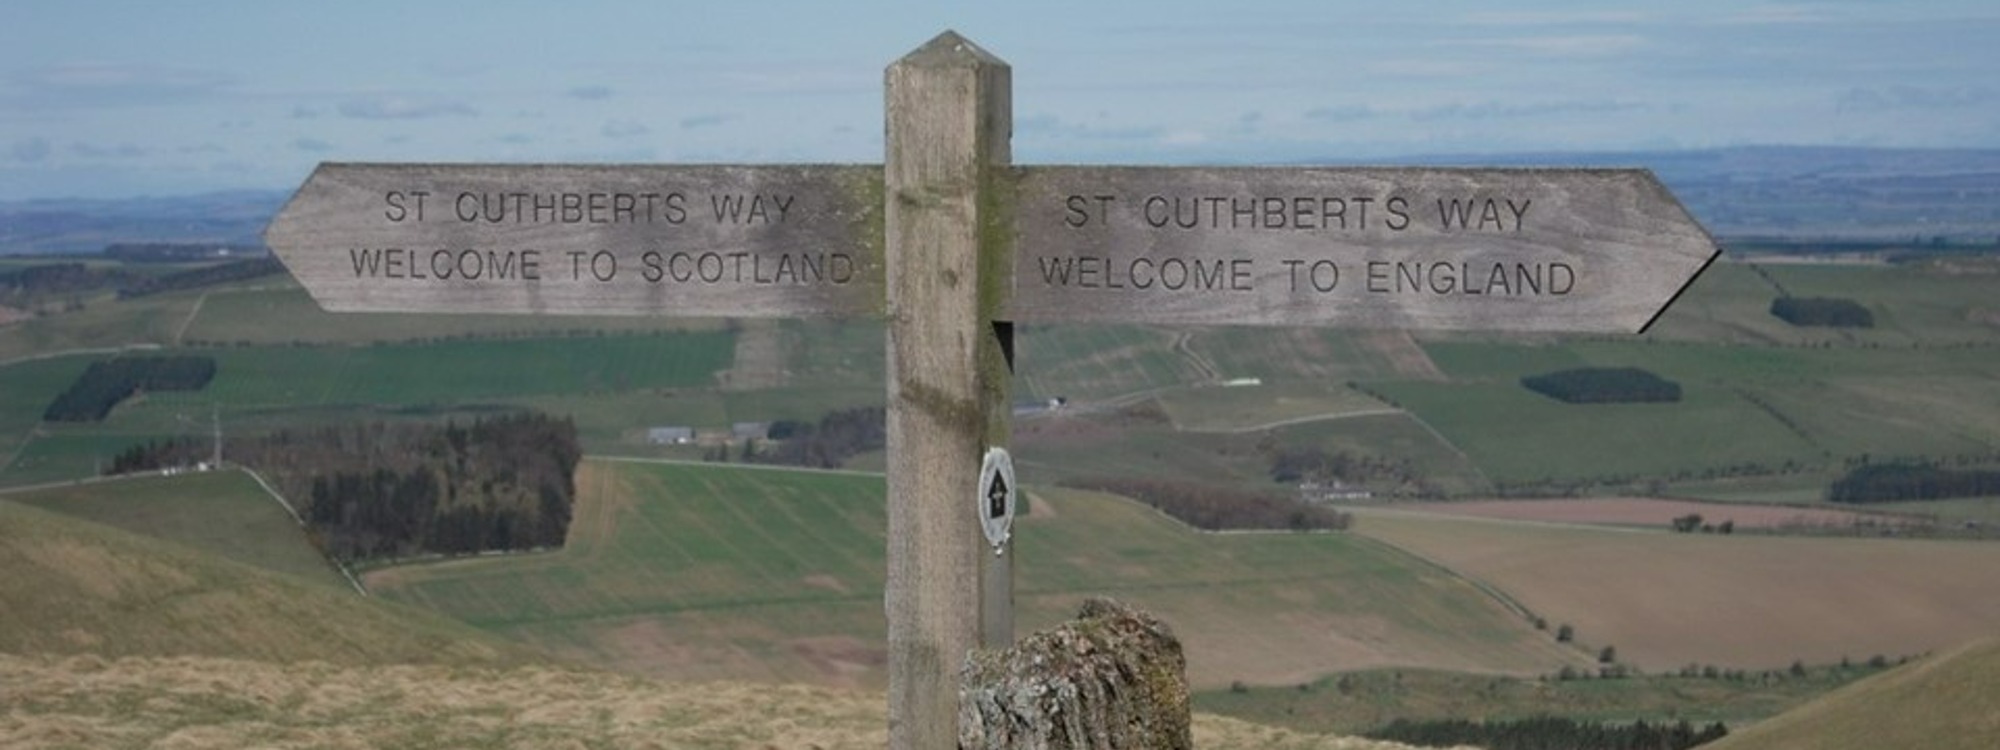 St Cuthbert's Way*31st August - 7th September*Find out more